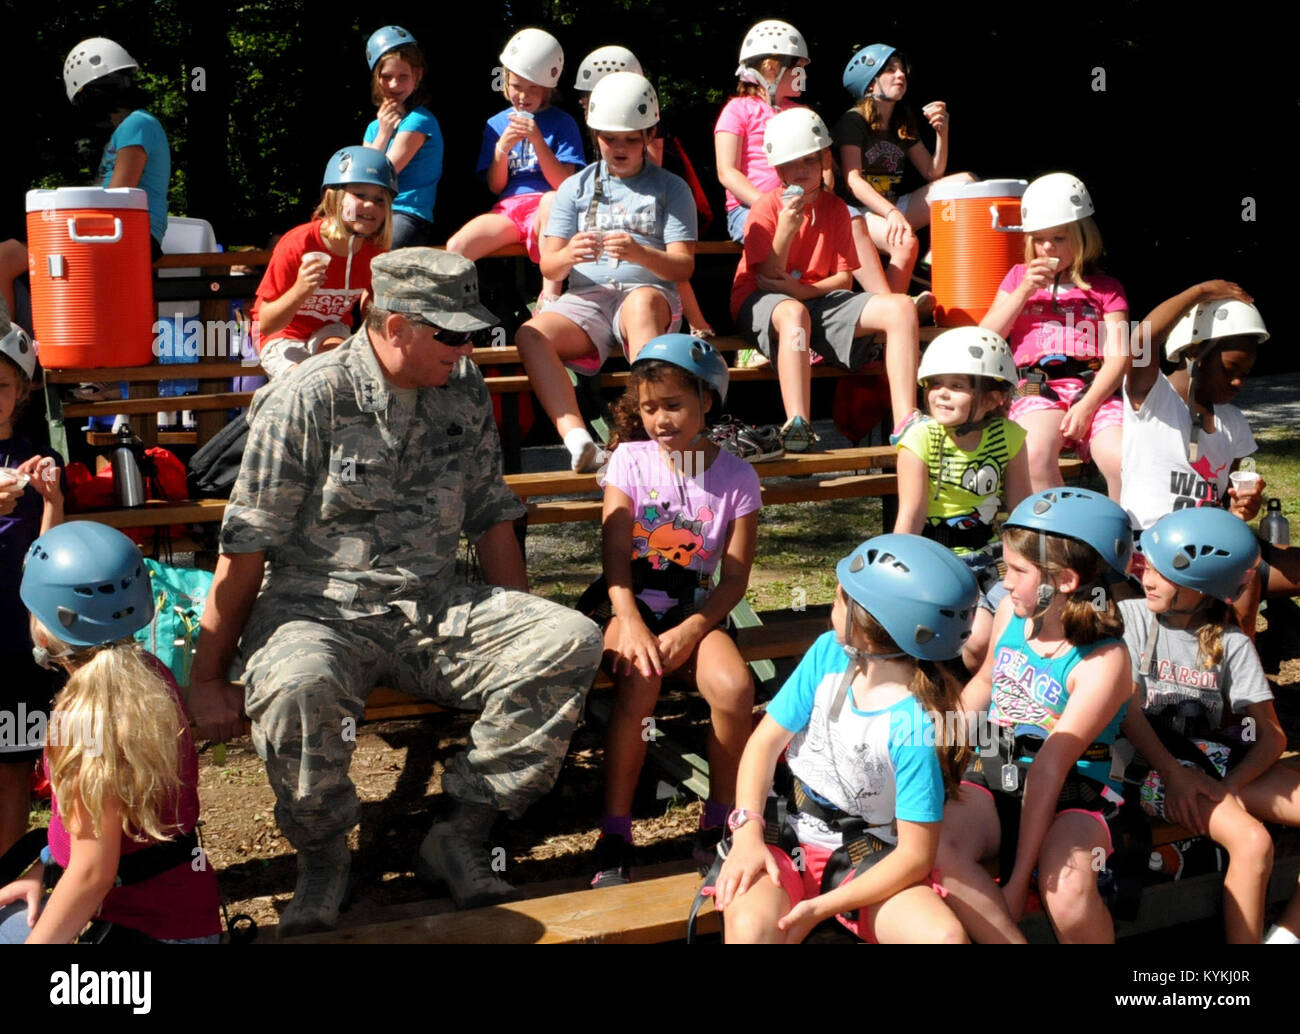 Kentucky's Adj. Gen., Maj. Gen. Edward Tonini, interacts with some of the female participants of the  Kentucky National Guard 4-H Youth Camp July 15 at Lake Cumberland, Ky. The girls were preparing to climb a rock wall. (U.S. Army National Guard photo by Spc. Brandy Mort) Stock Photo